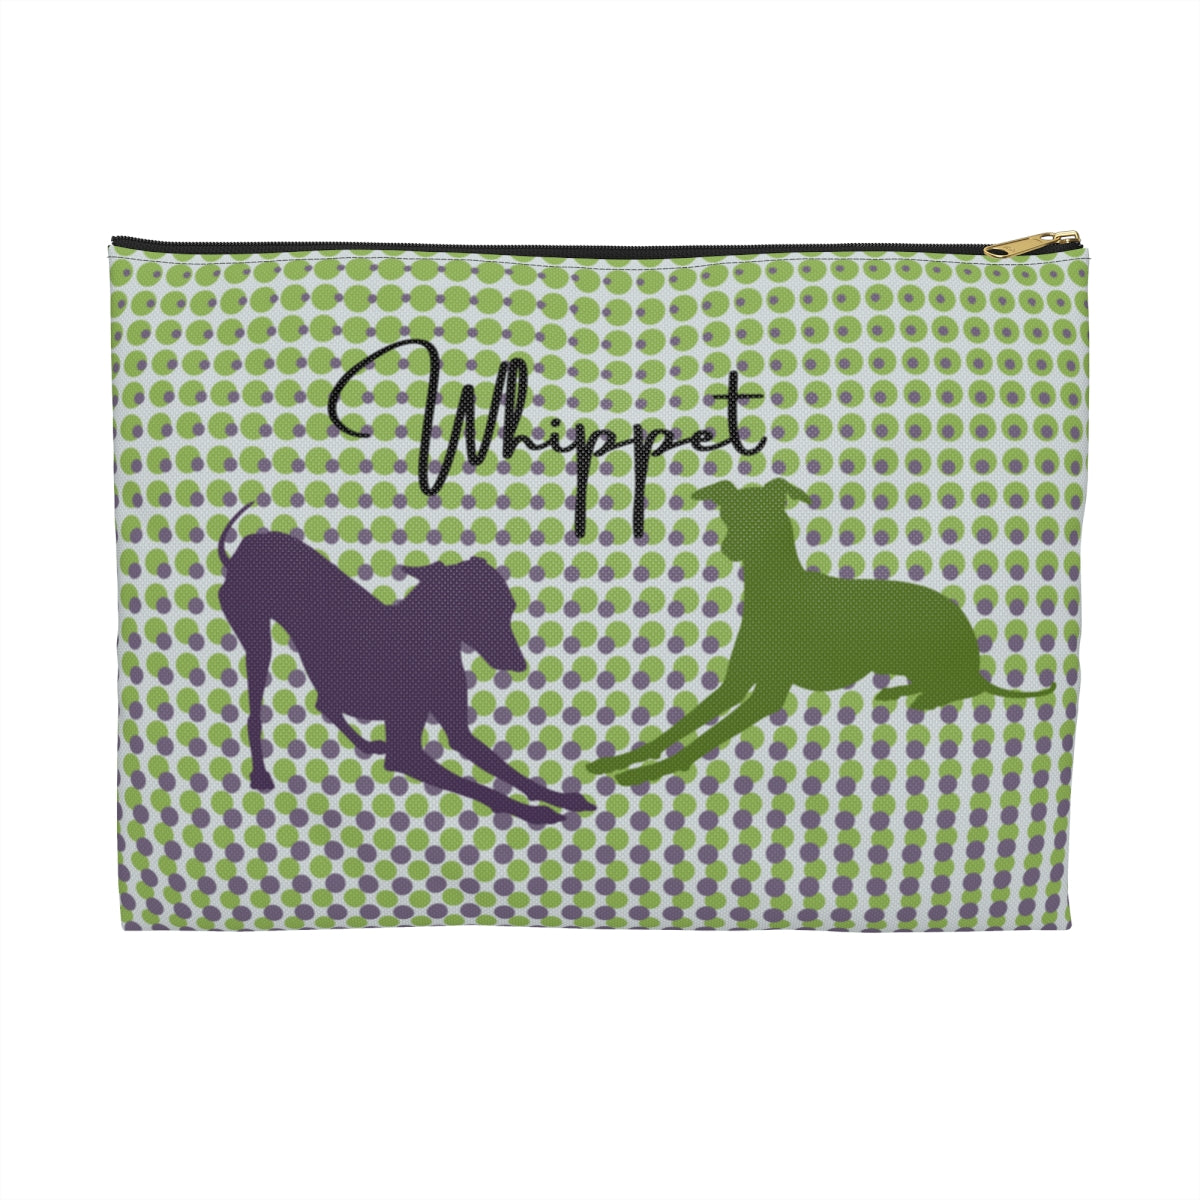 Whippet Travel Bag,  Trendy, Colorful Design - The Dapper Dogg